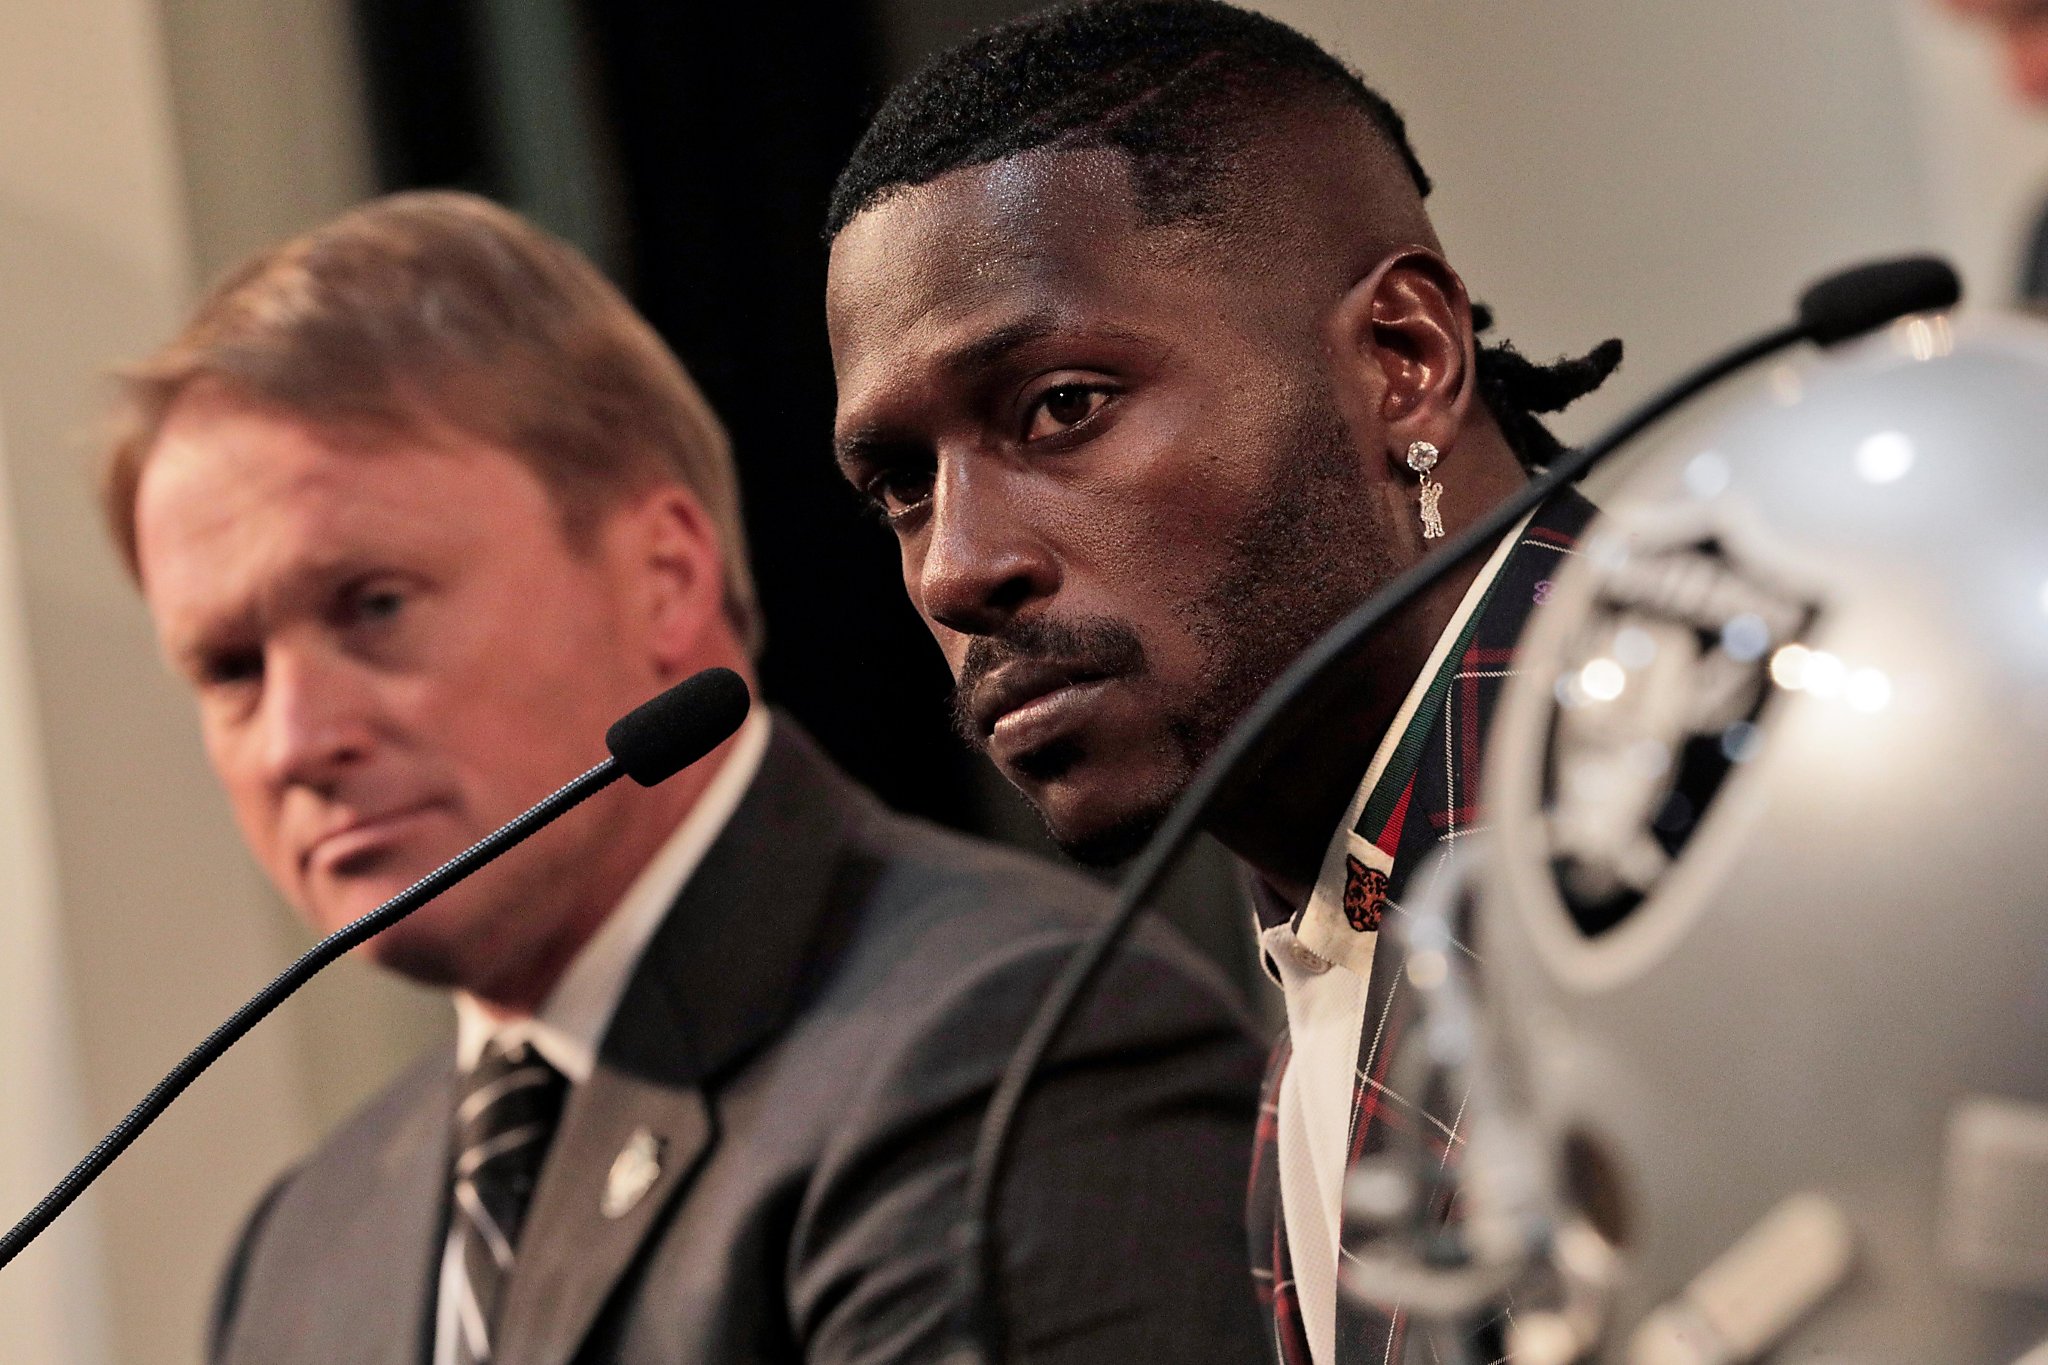 Antonio Brown Joins the Patriots After Leaving the Raiders: A